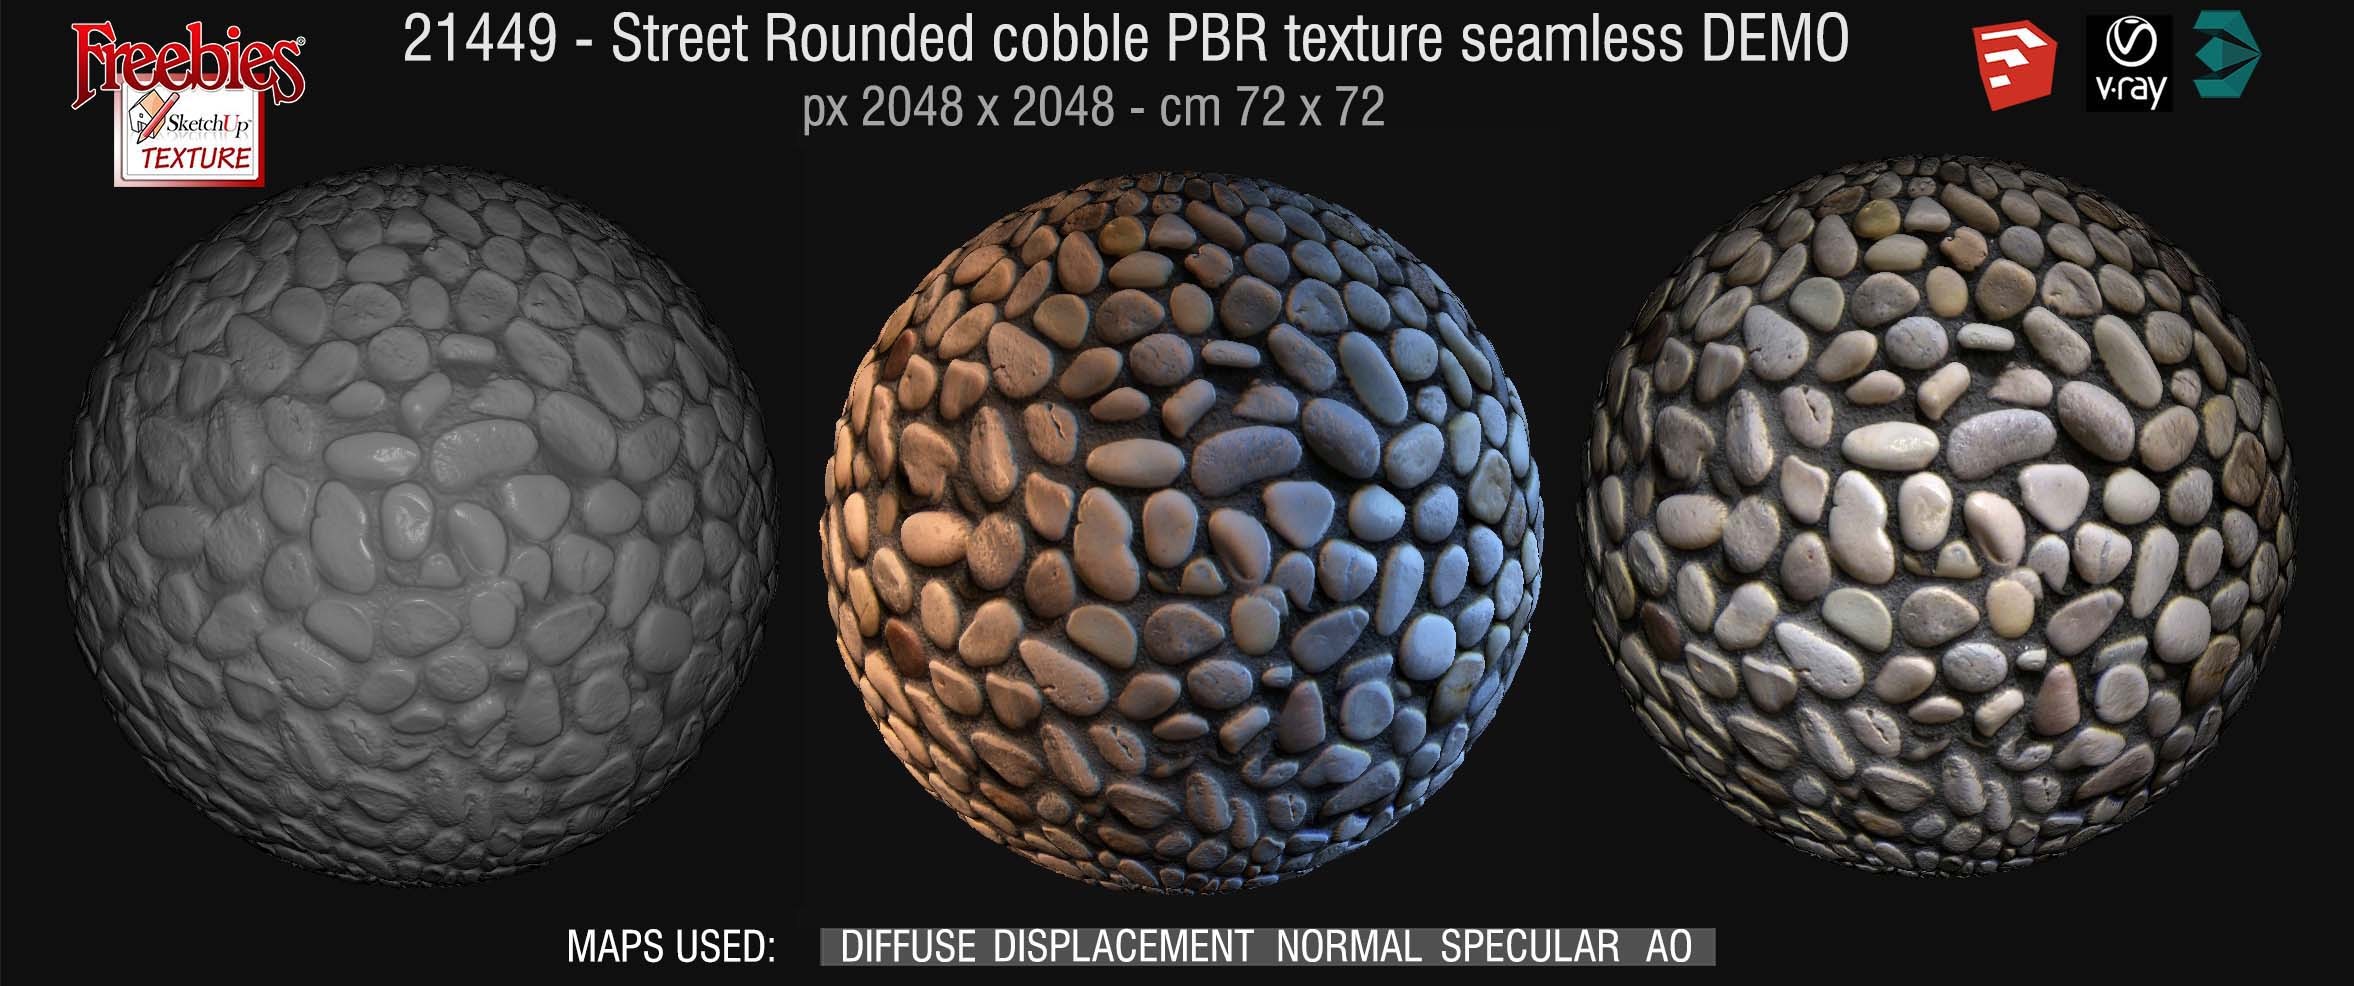 21449 Street Rounded cobble PBR texture seamless DEMO